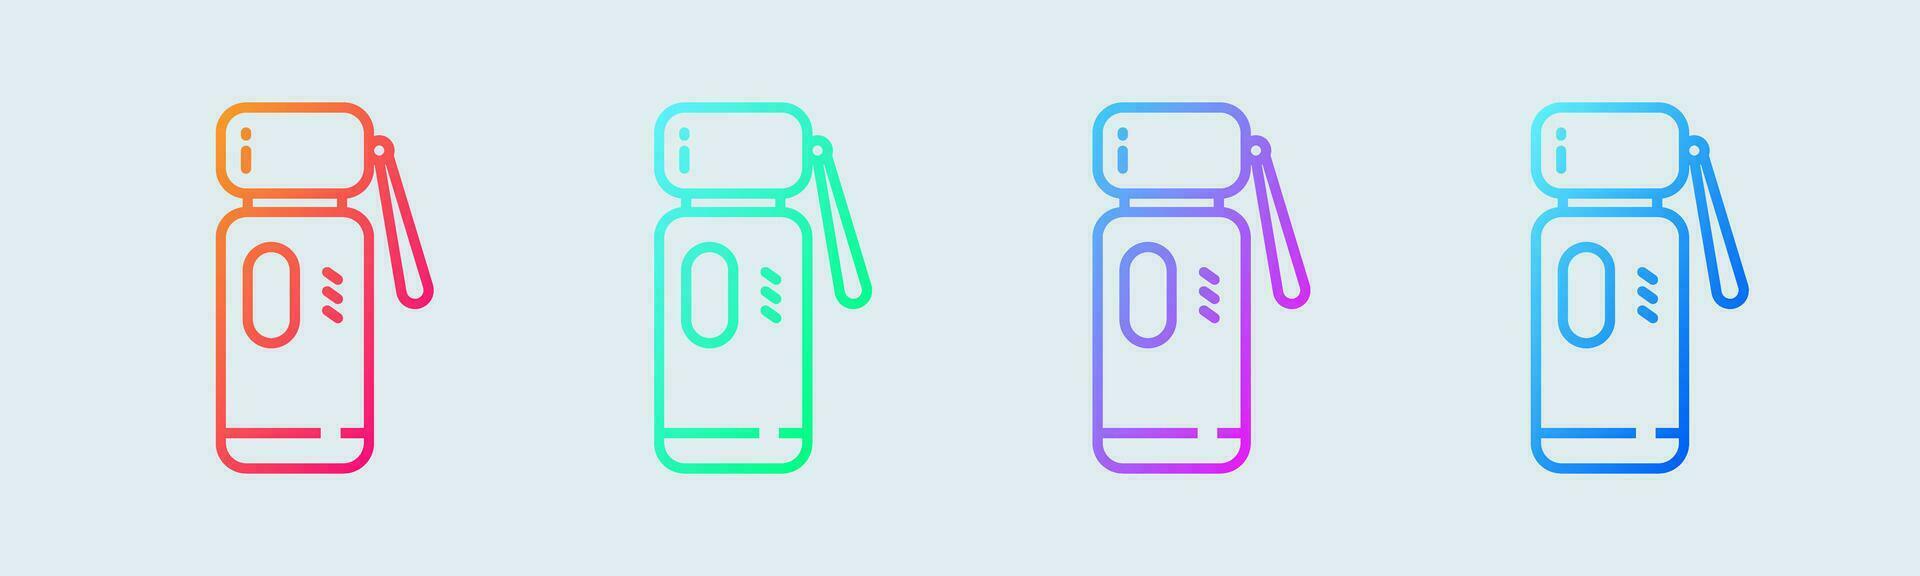 Thermos line icon in gradient colors. Hot water signs vector illustration.